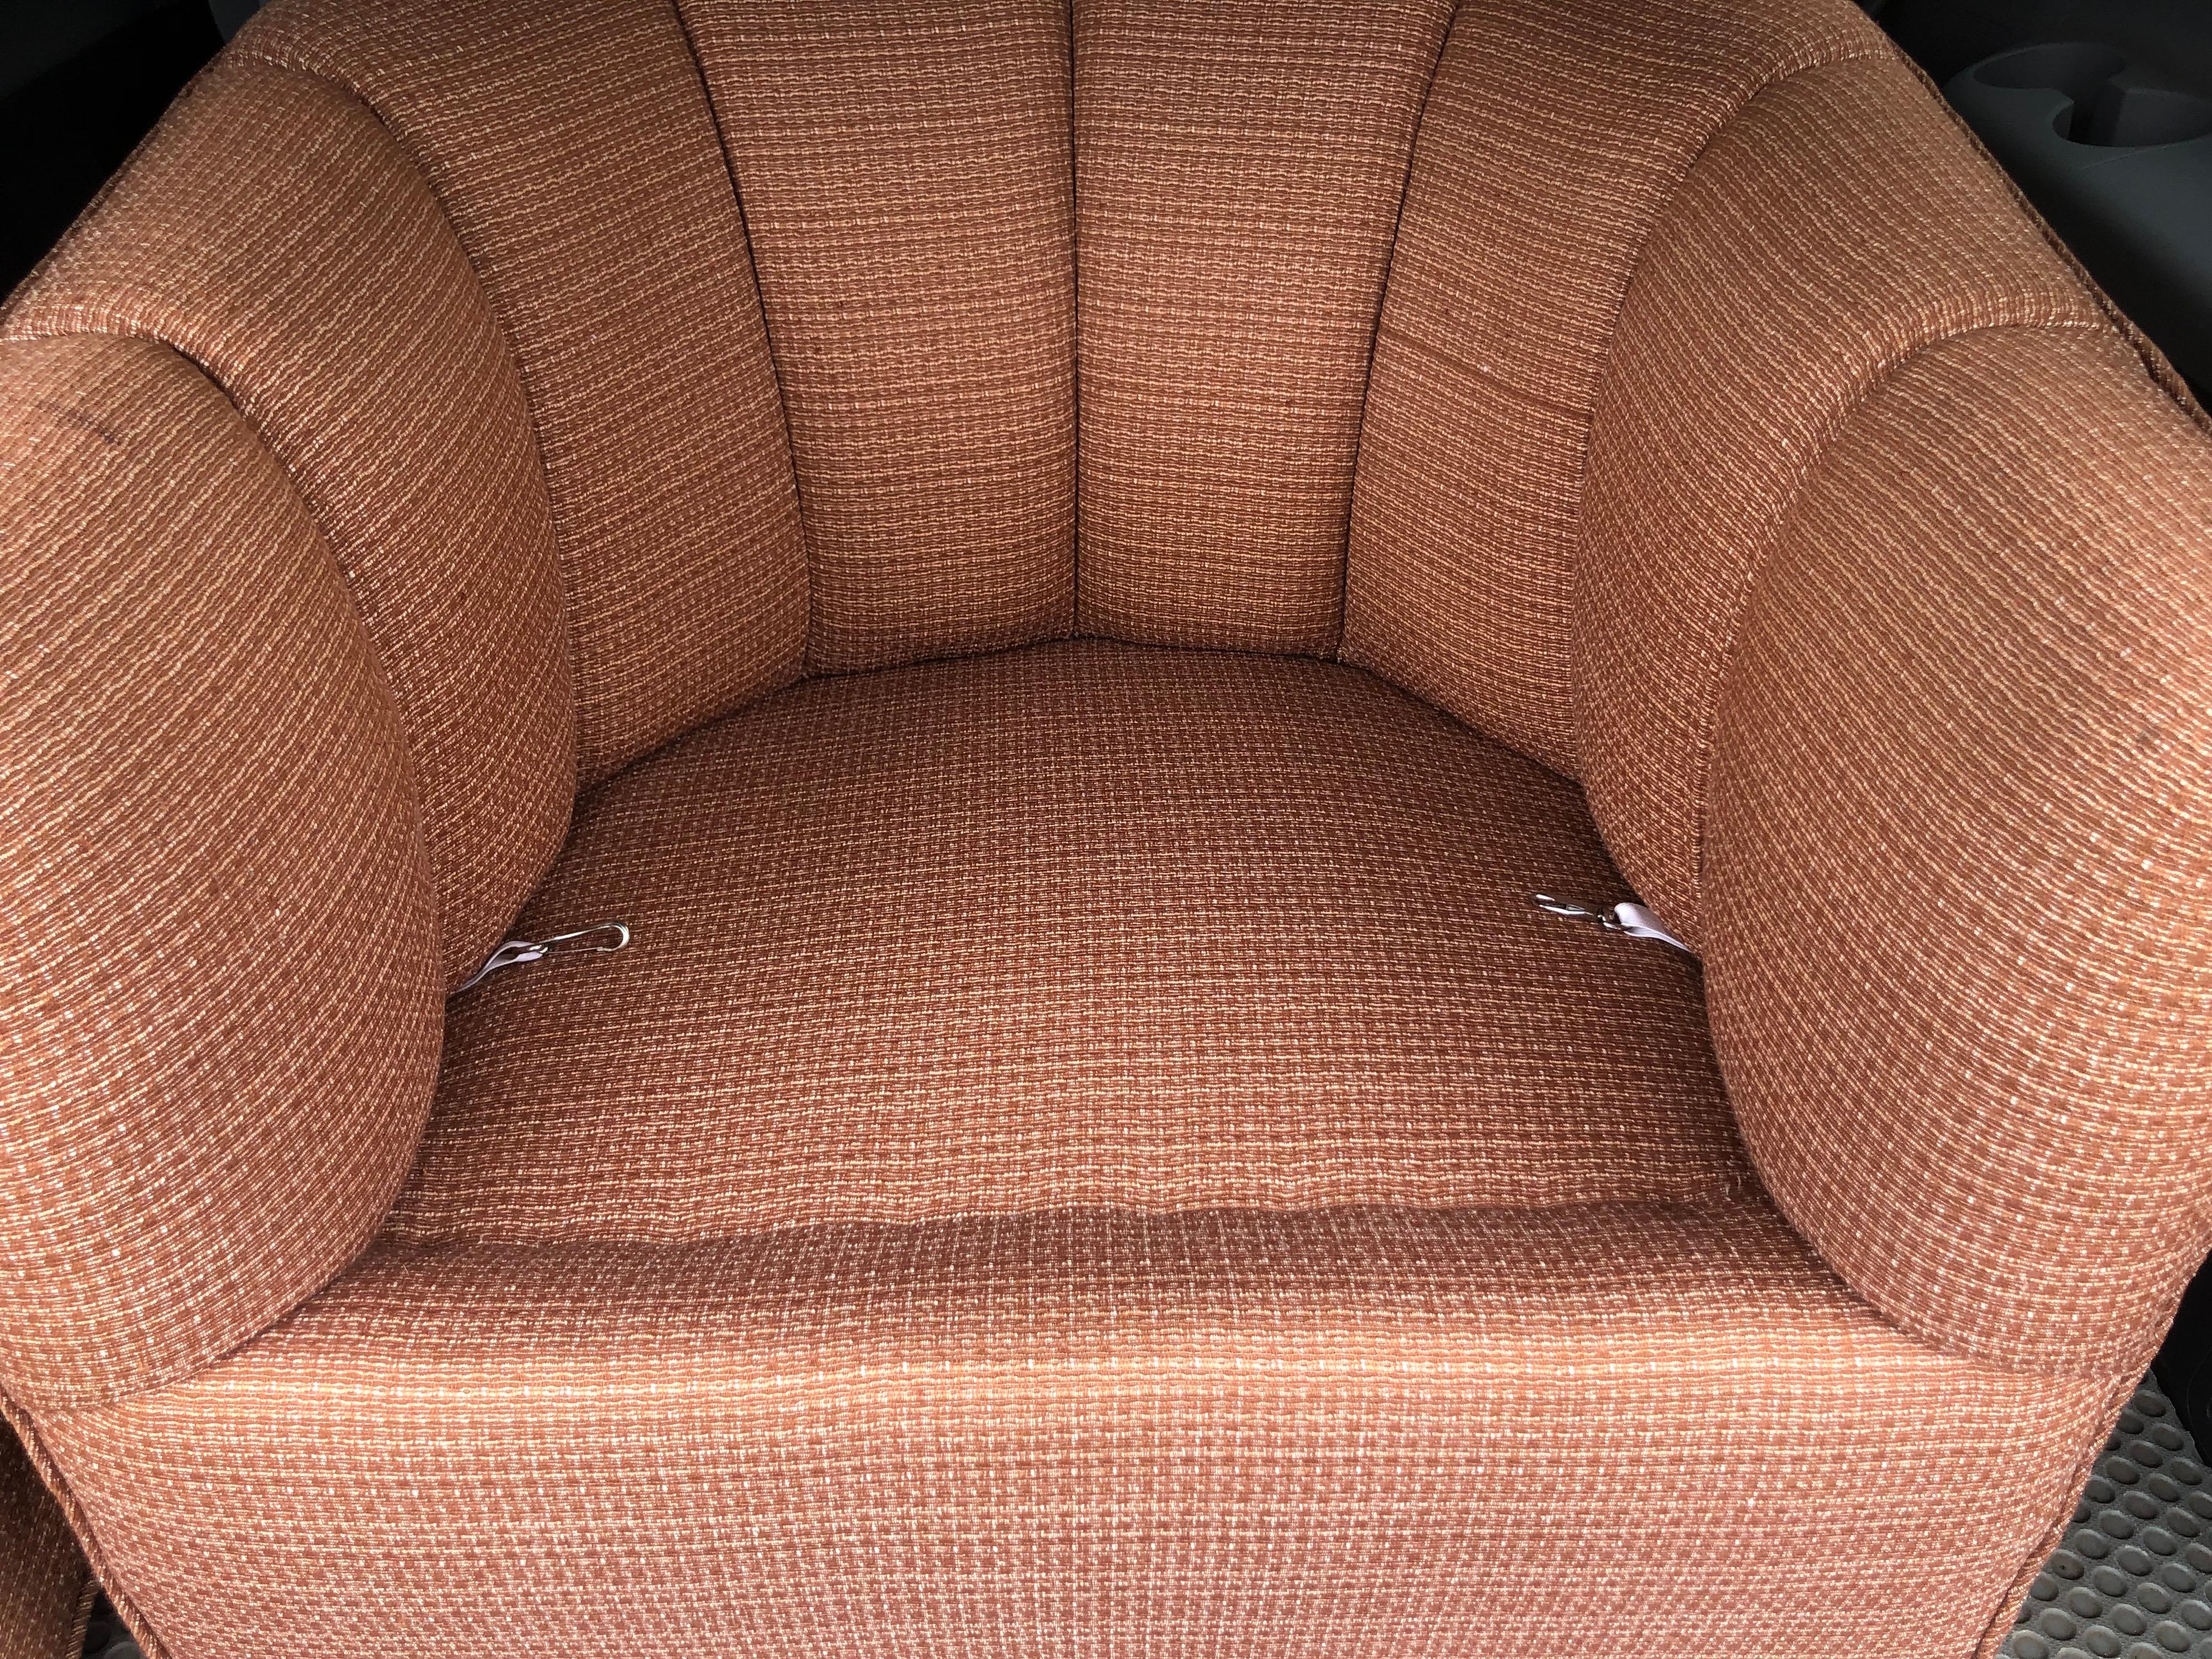 swivel club chairs for sale